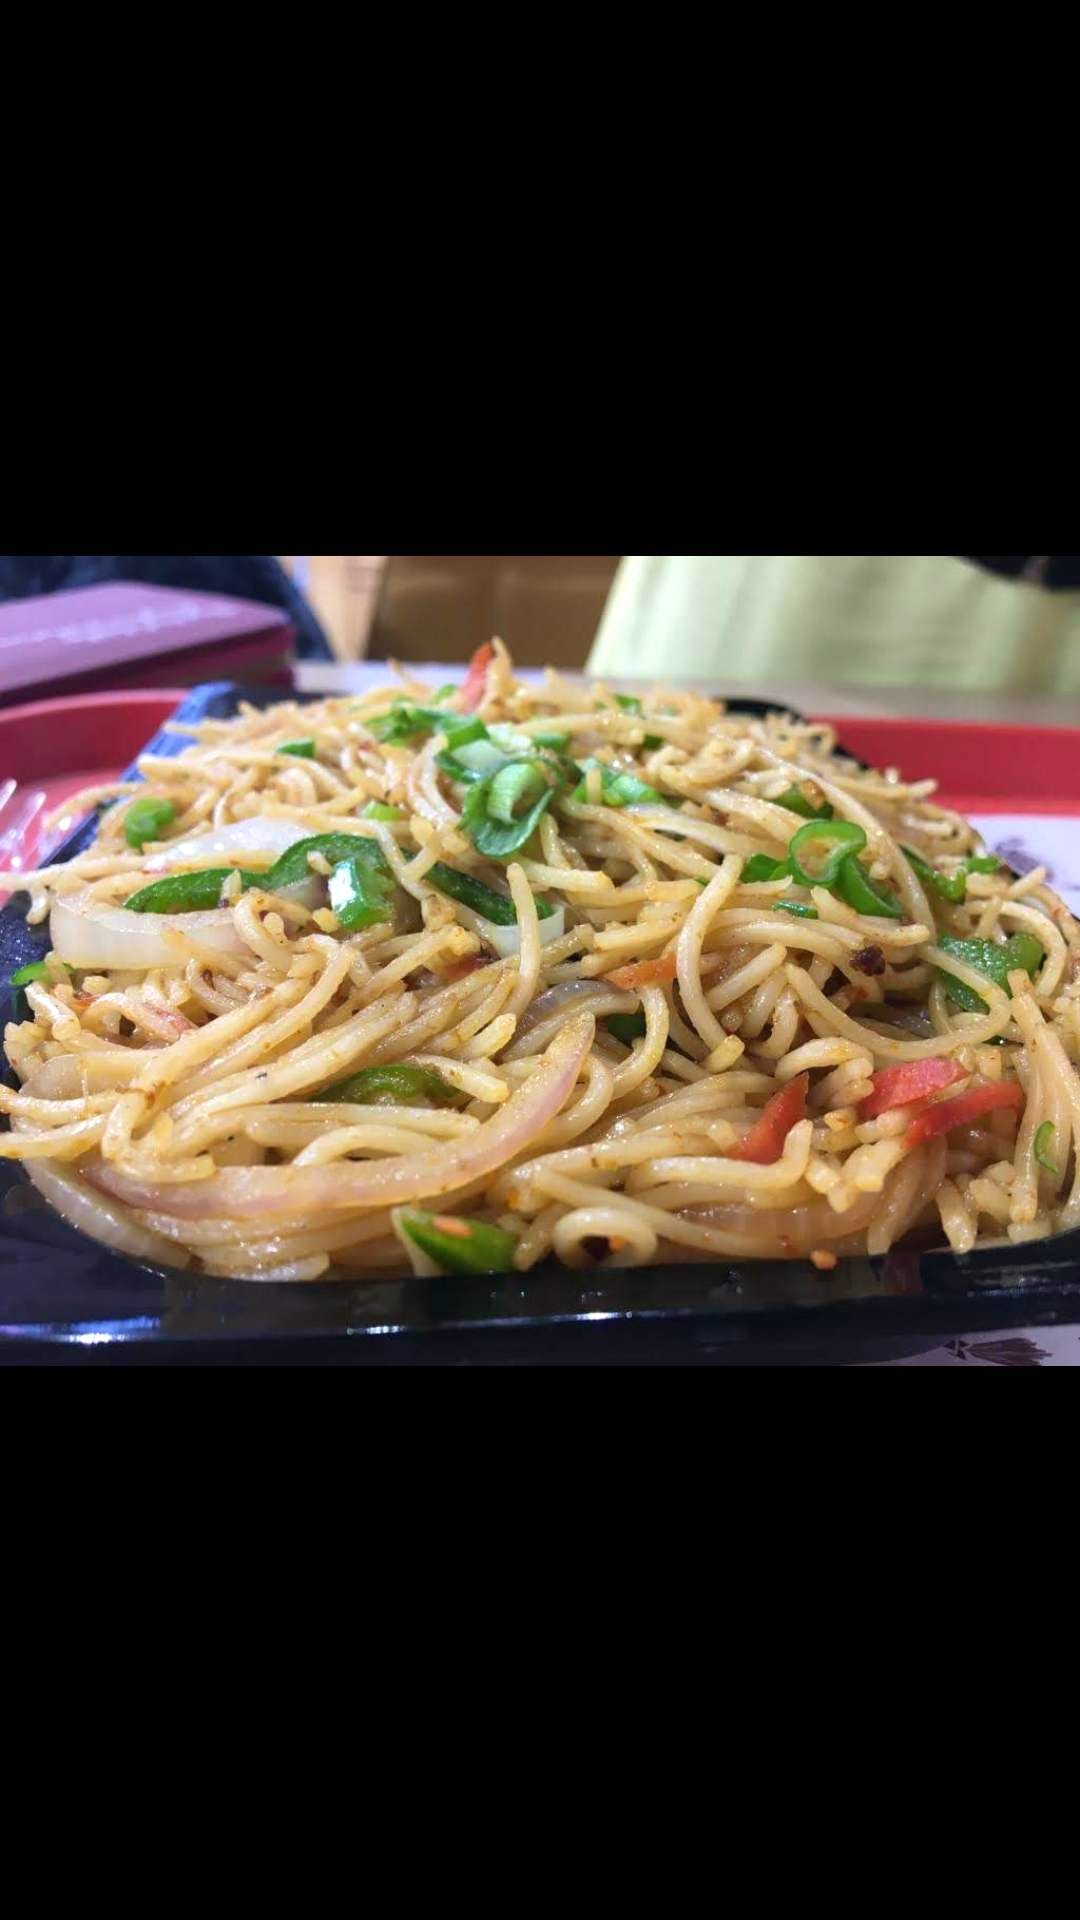 Dish,Food,Cuisine,Noodle,Chow mein,Spaghetti,Yaki udon,Fried noodles,Yakisoba,Lo mein